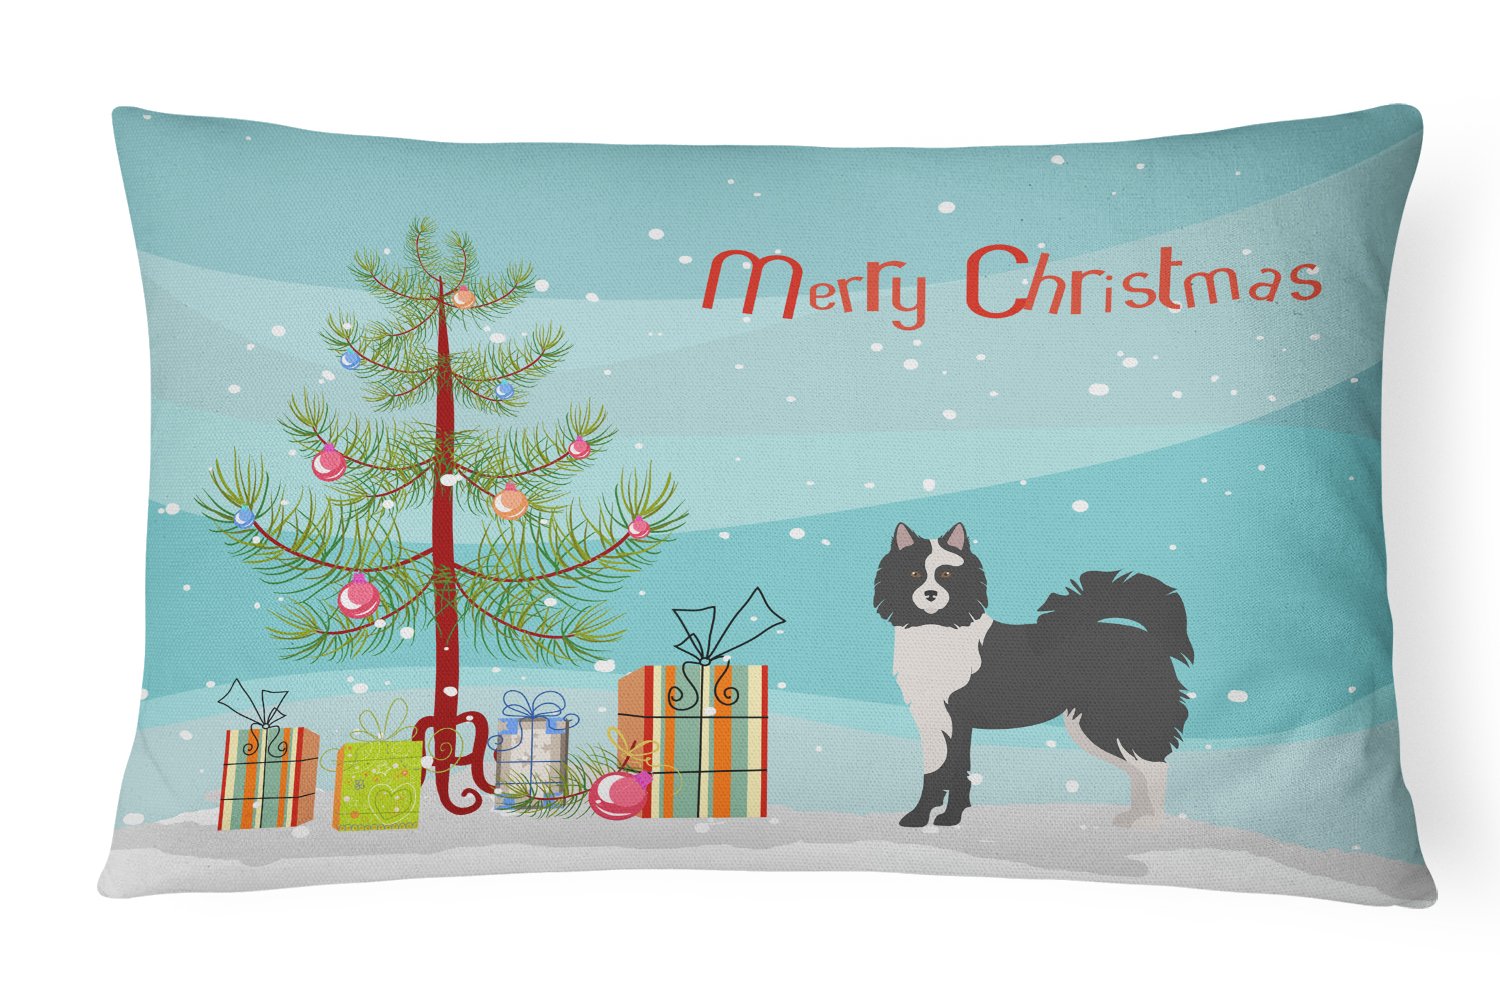 Black and White Elo dog Christmas Tree Canvas Fabric Decorative Pillow CK3452PW1216 by Caroline's Treasures